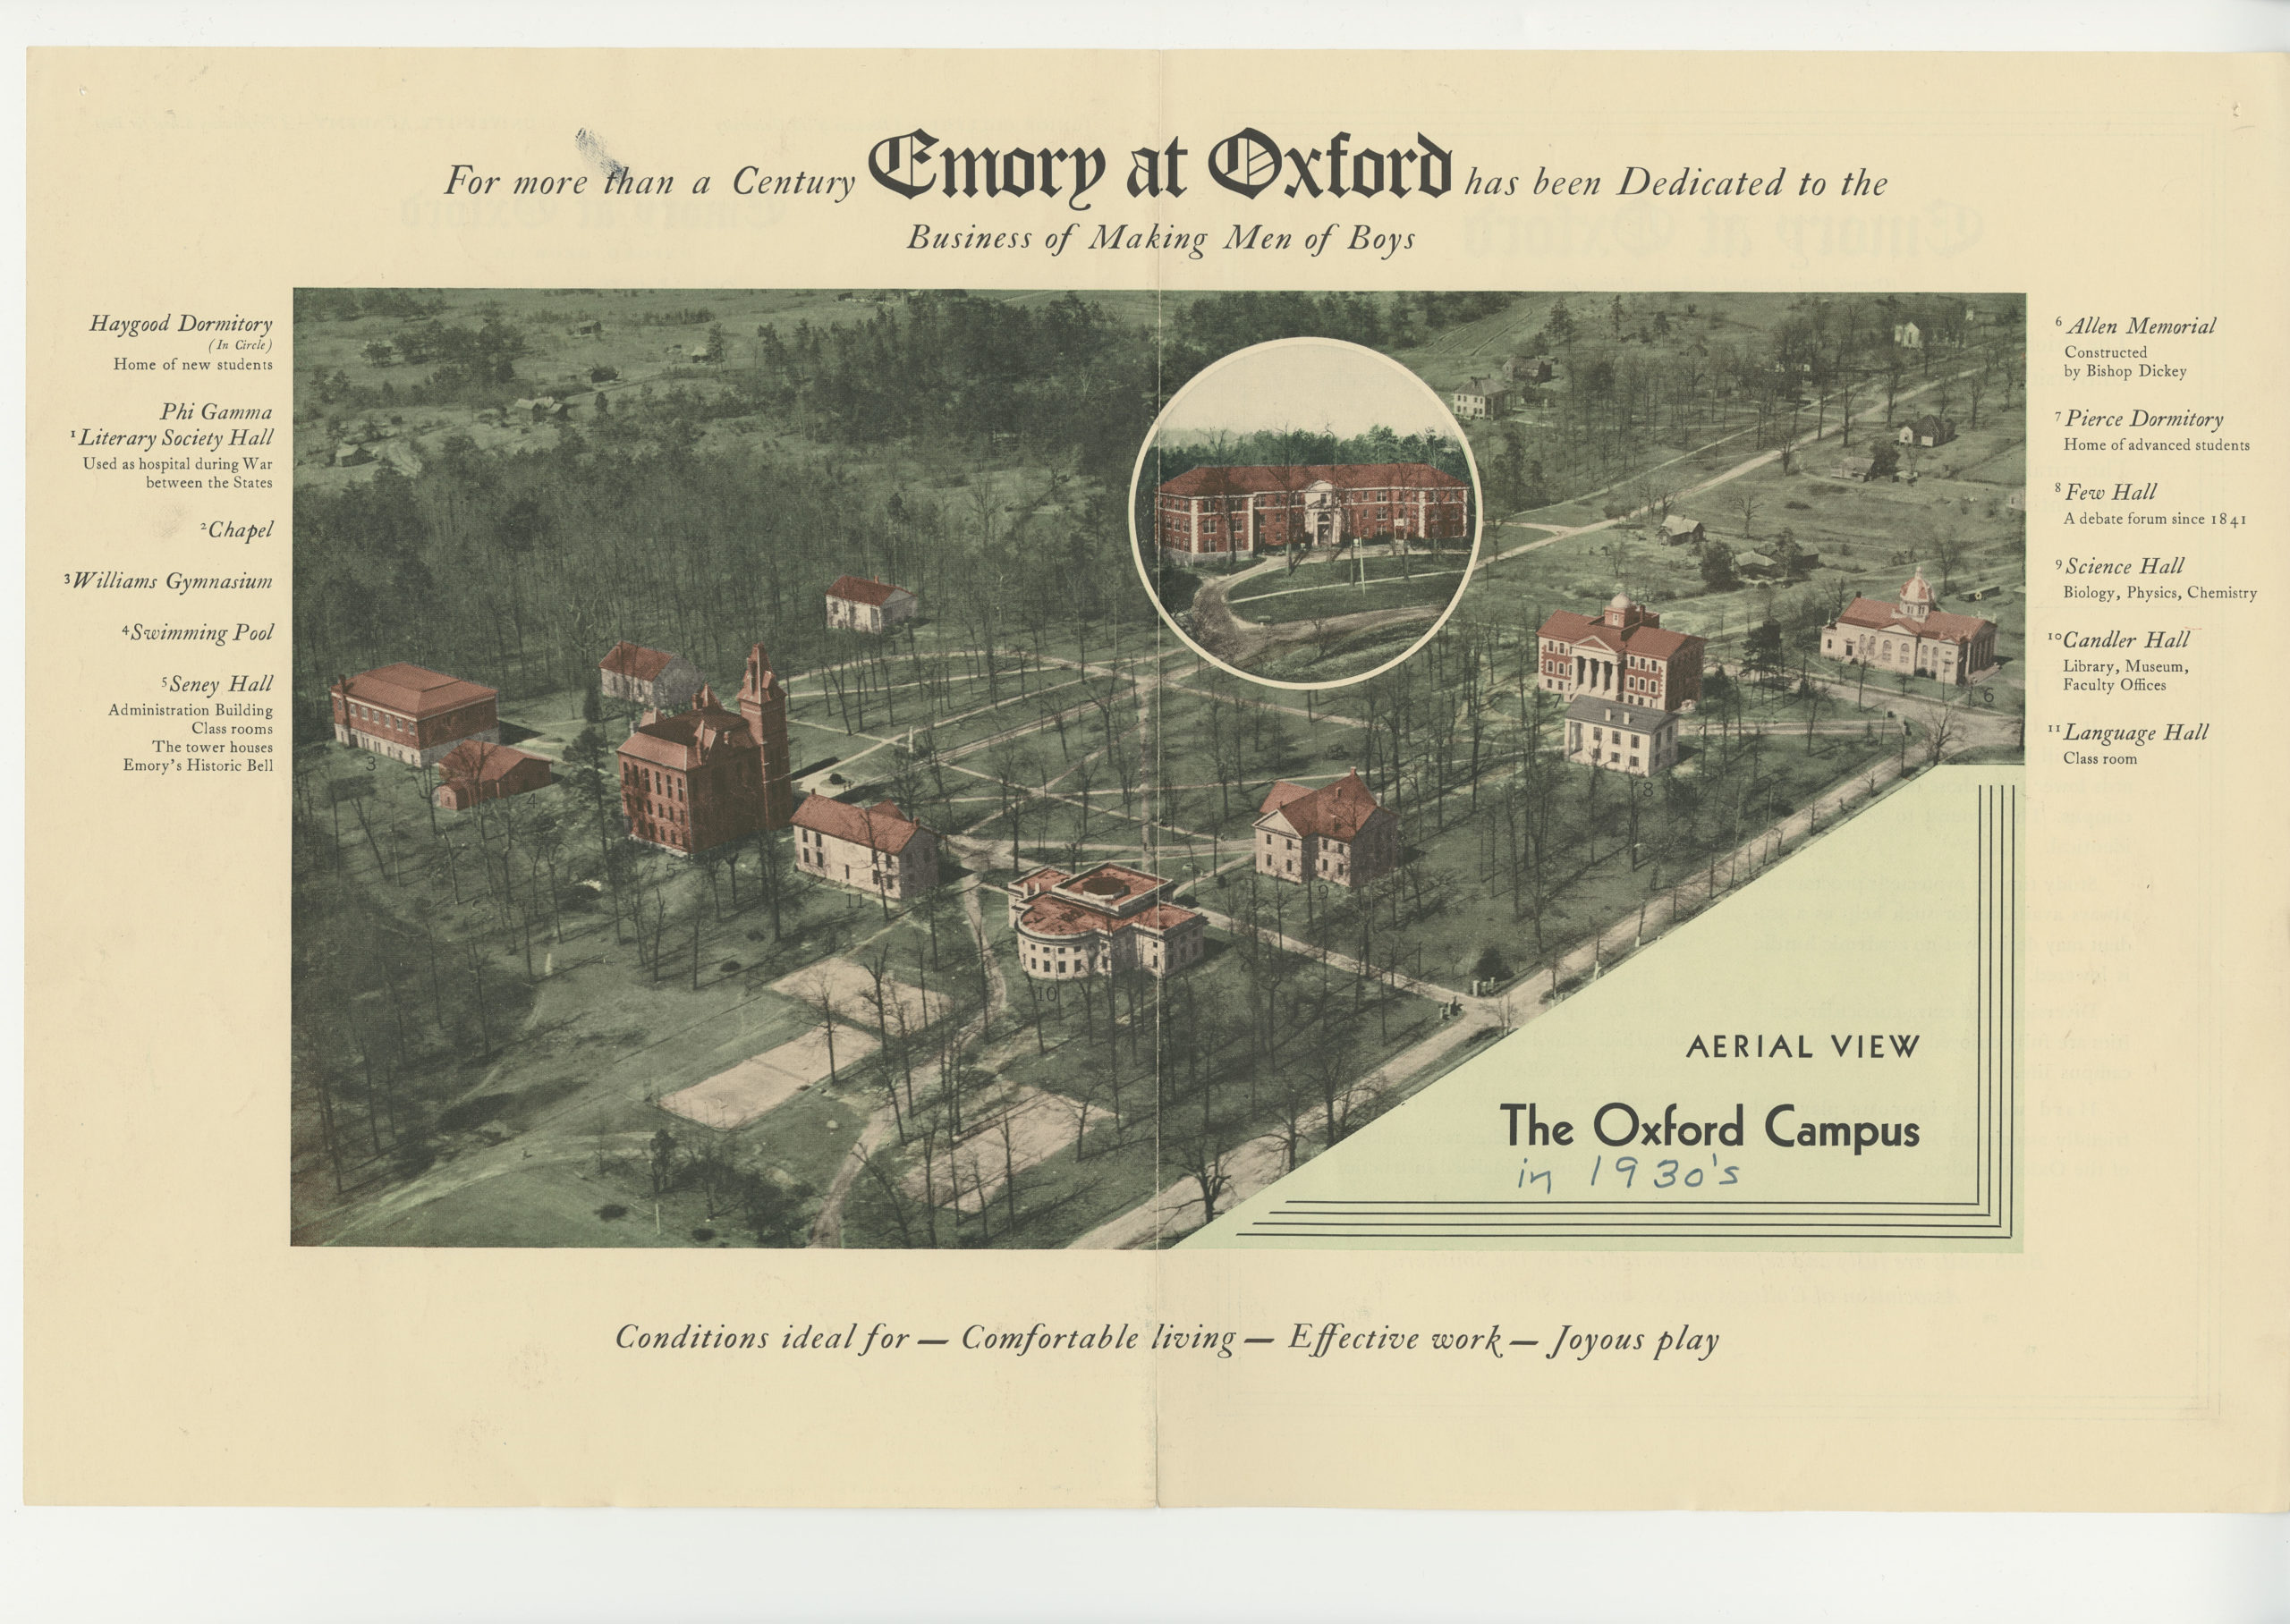 Oxford College Campus map from the 1940s.